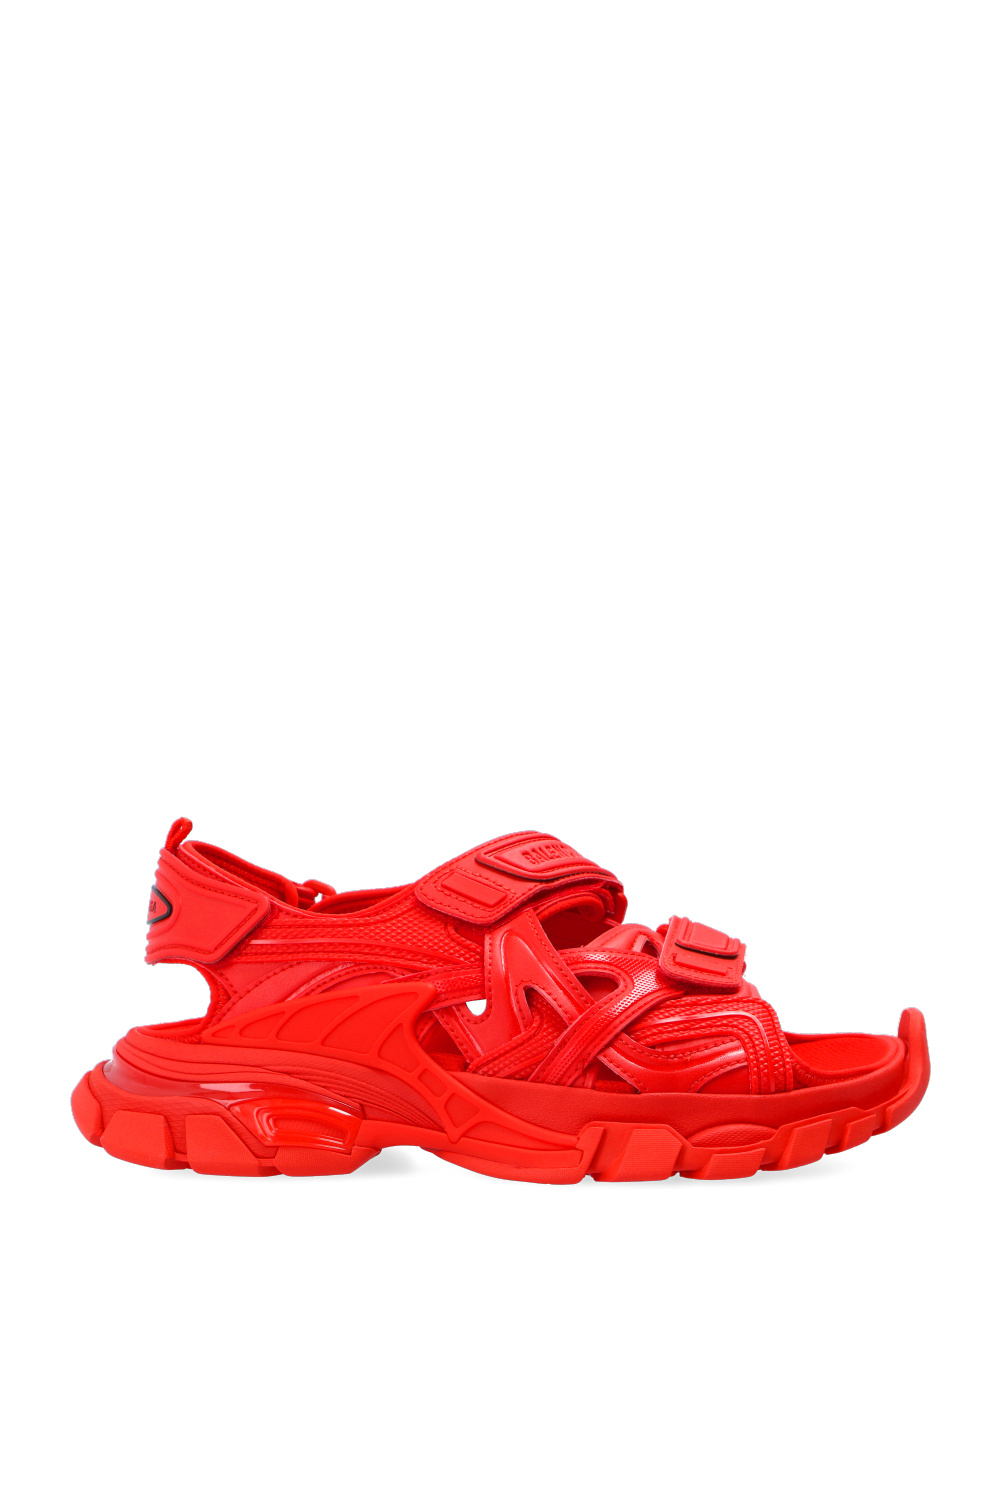 Buy Balenciaga women red track sandals for $930 online on SV77